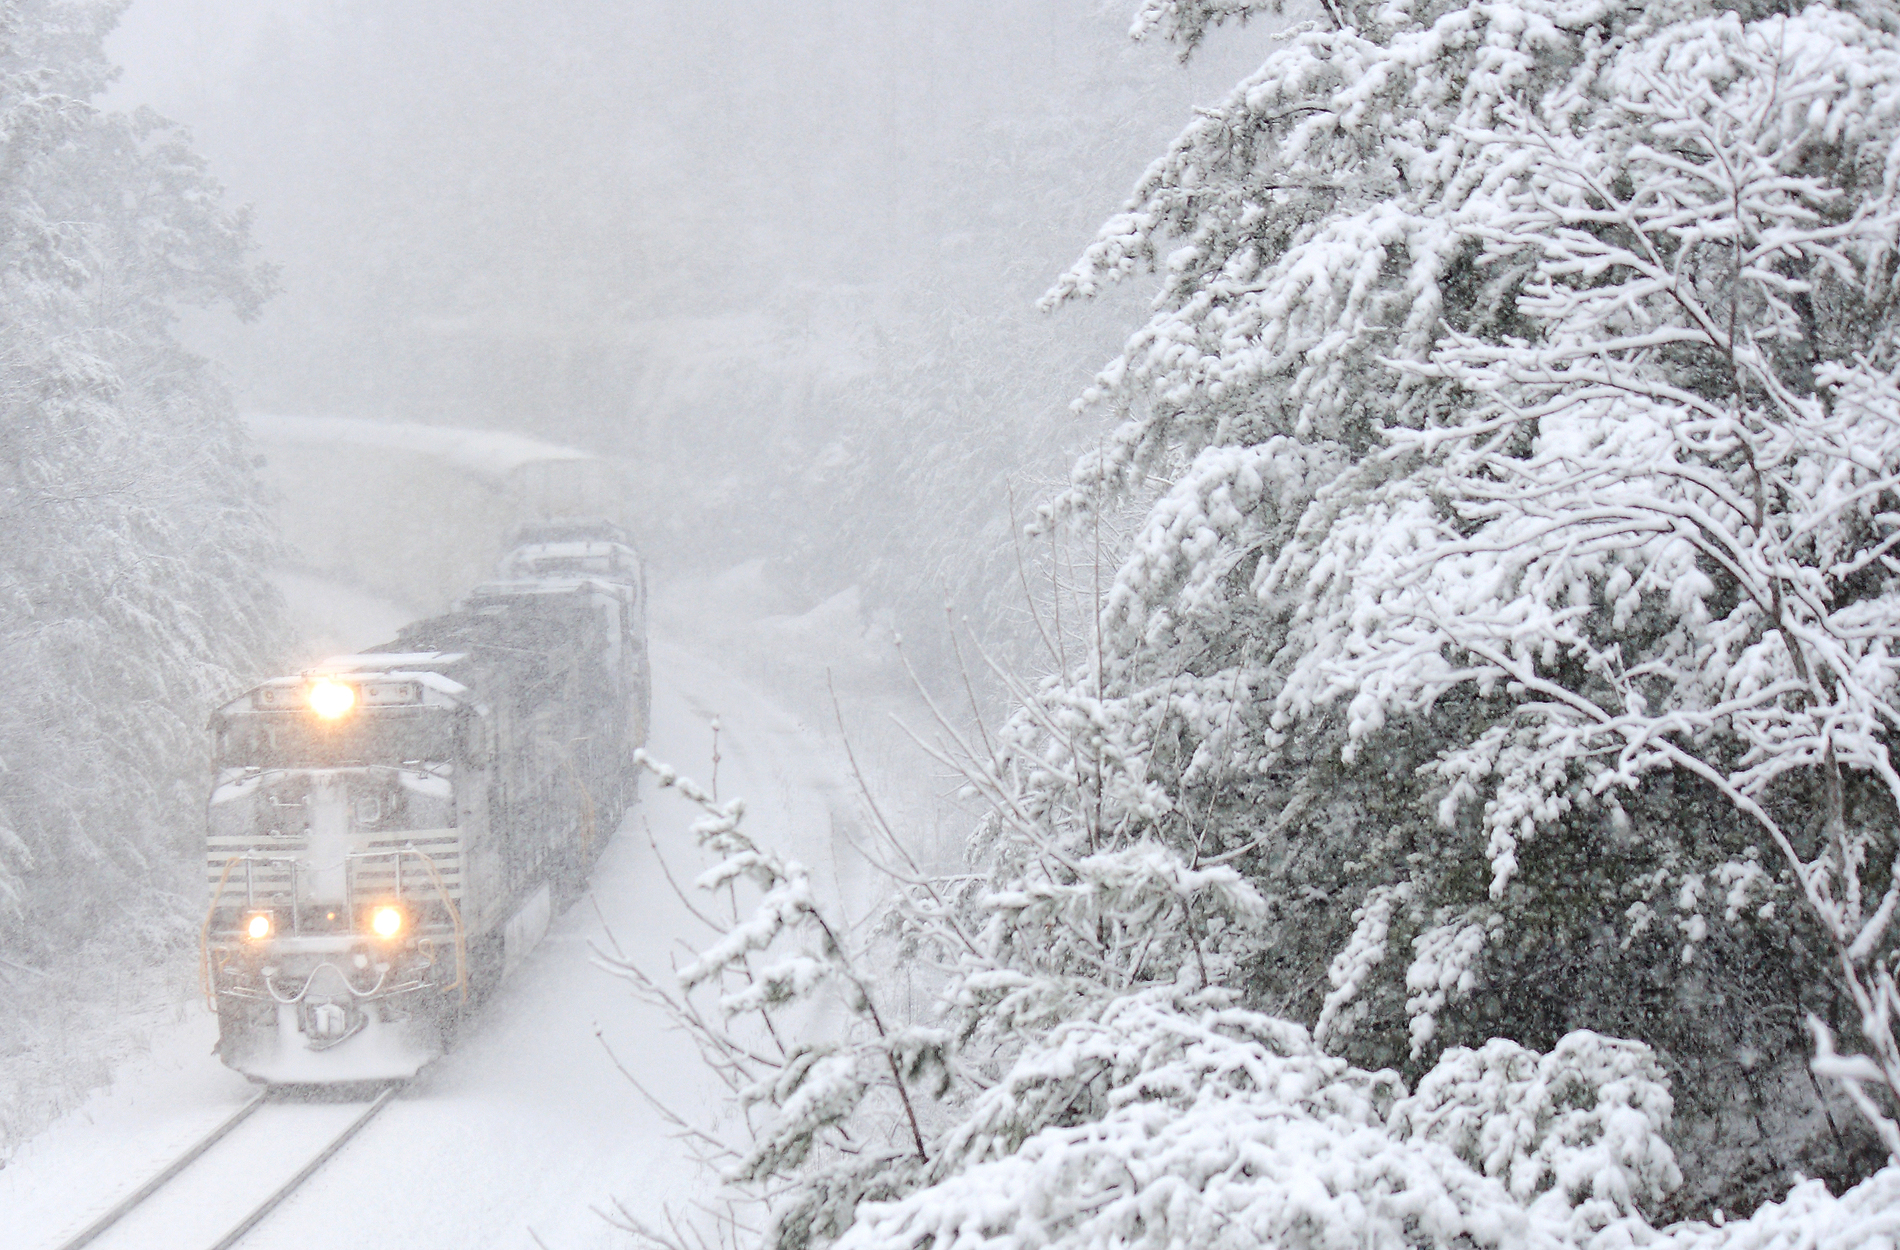 Heavy, wet snow clings to the trees as 223 rolls South. 